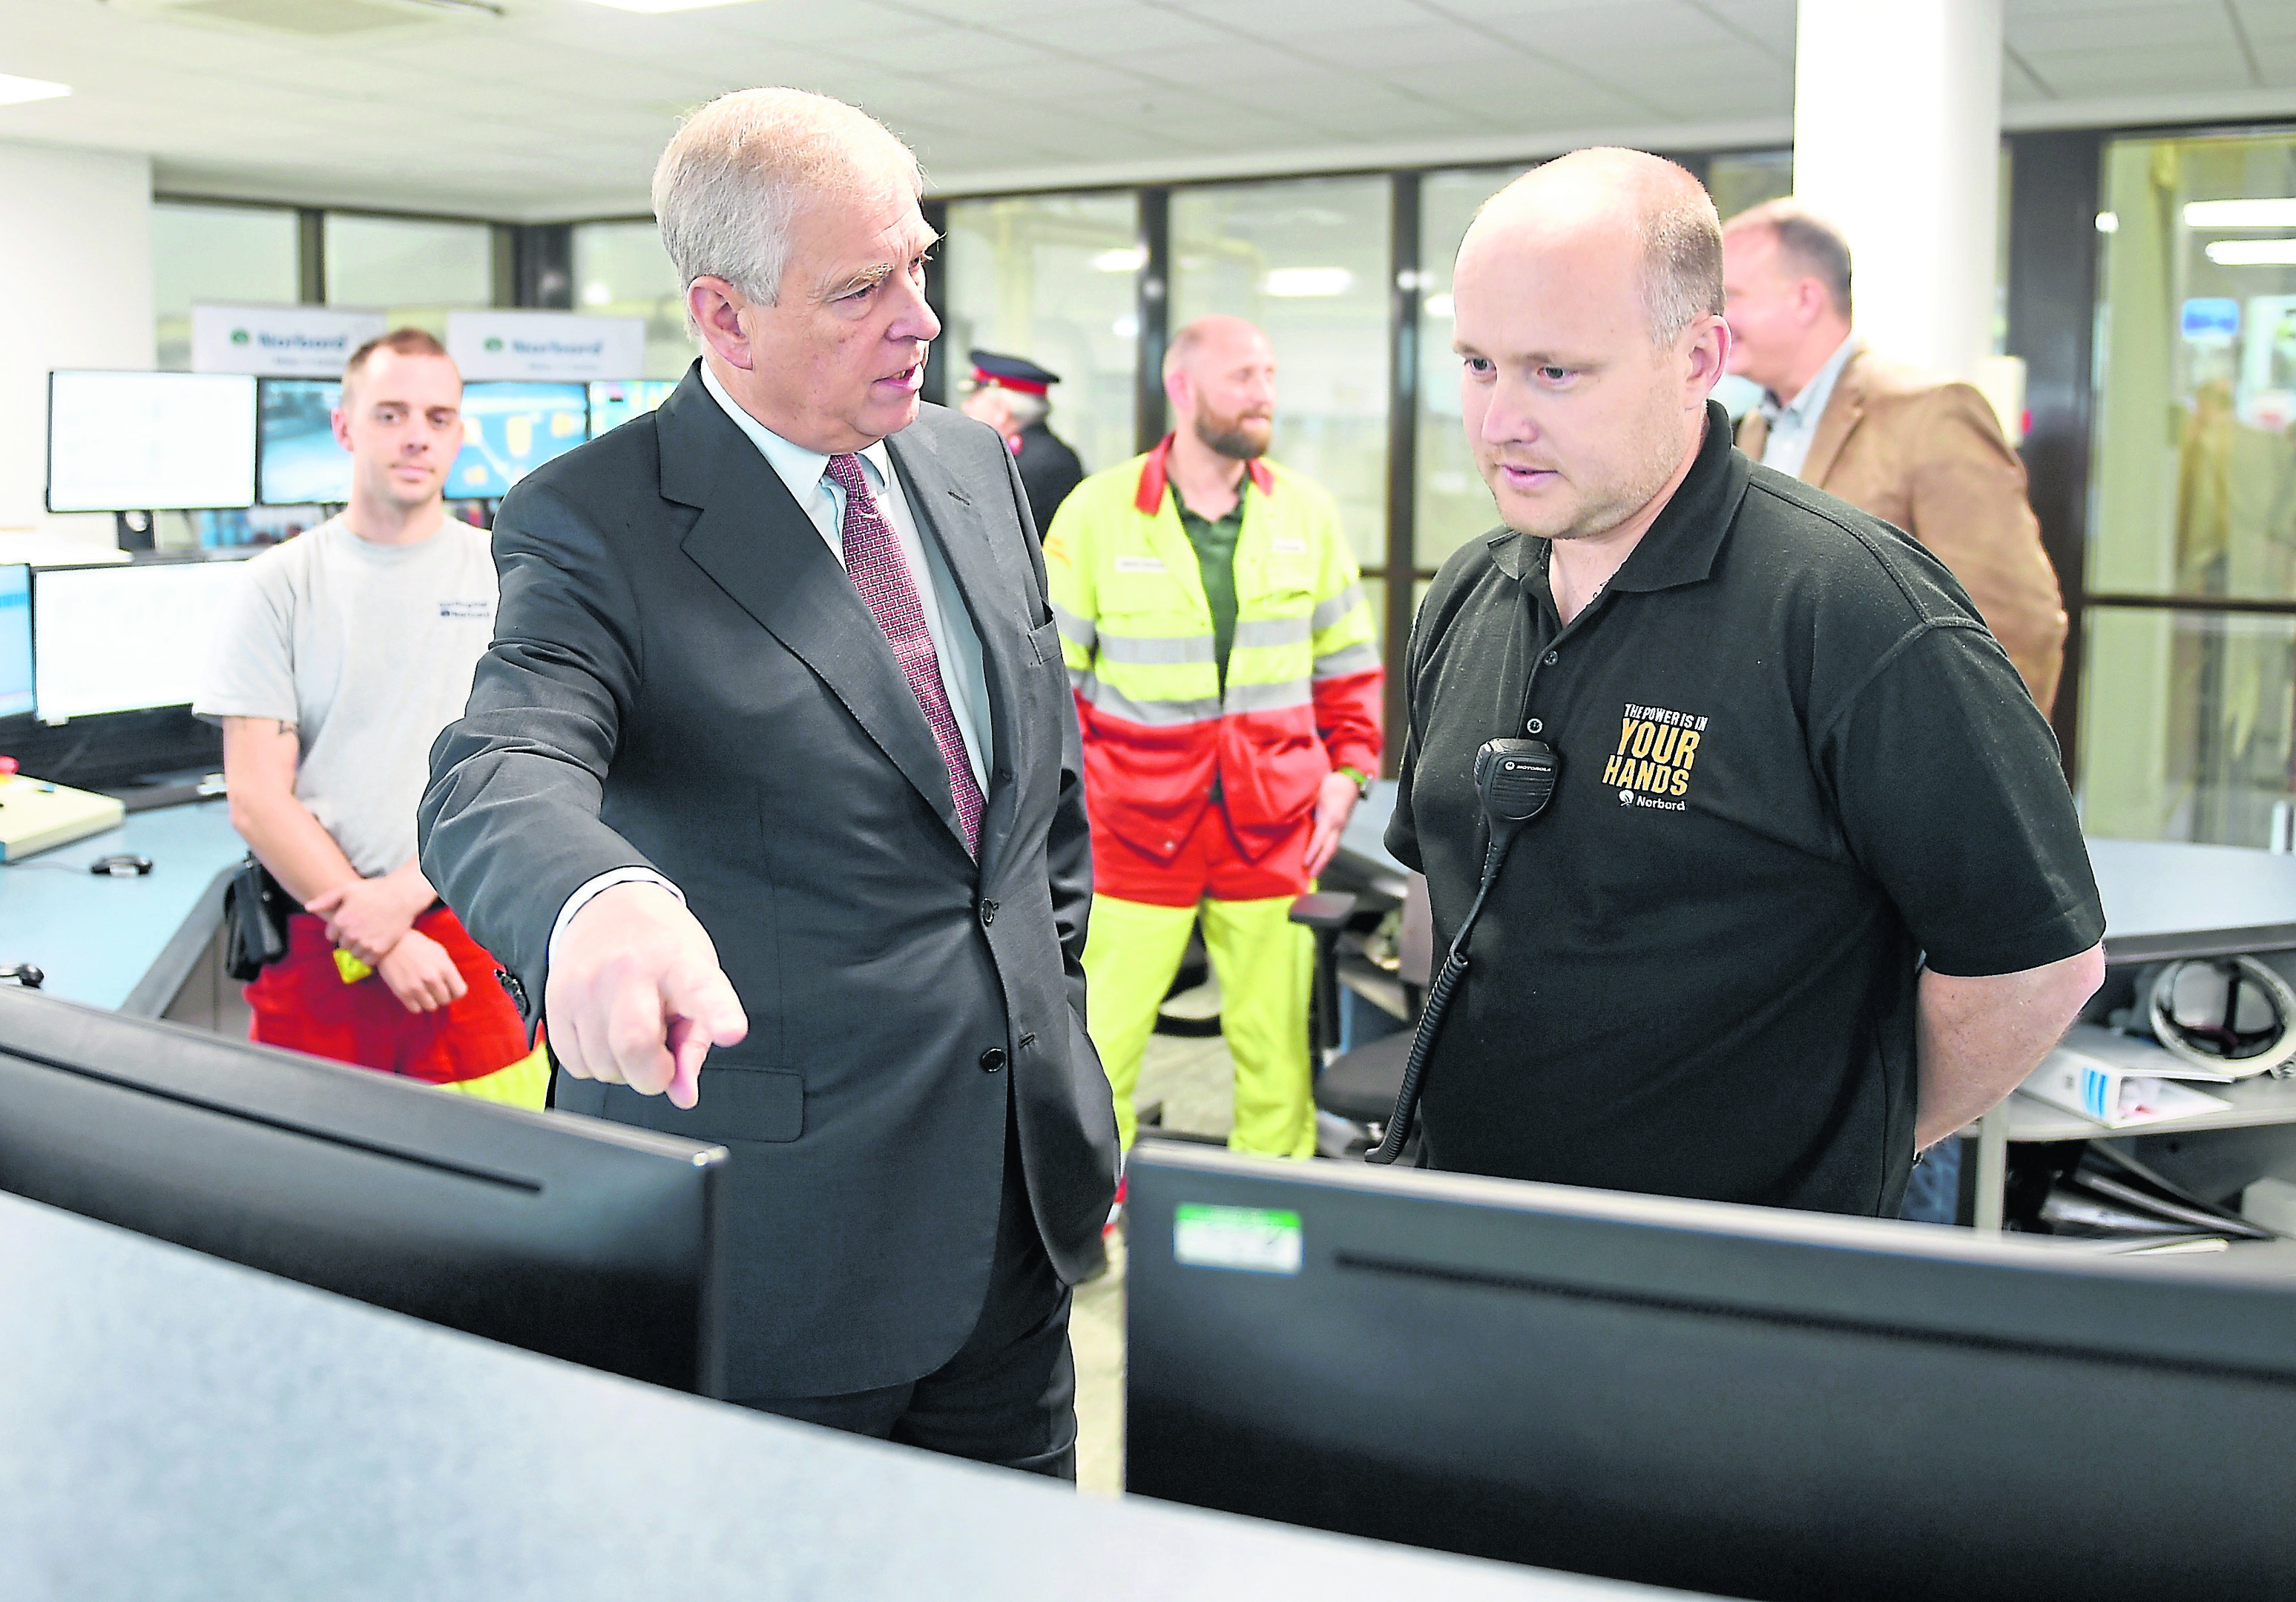 The Duke of York, Earl of Inverness yesterday toured the Norboard factory at Dalcross.